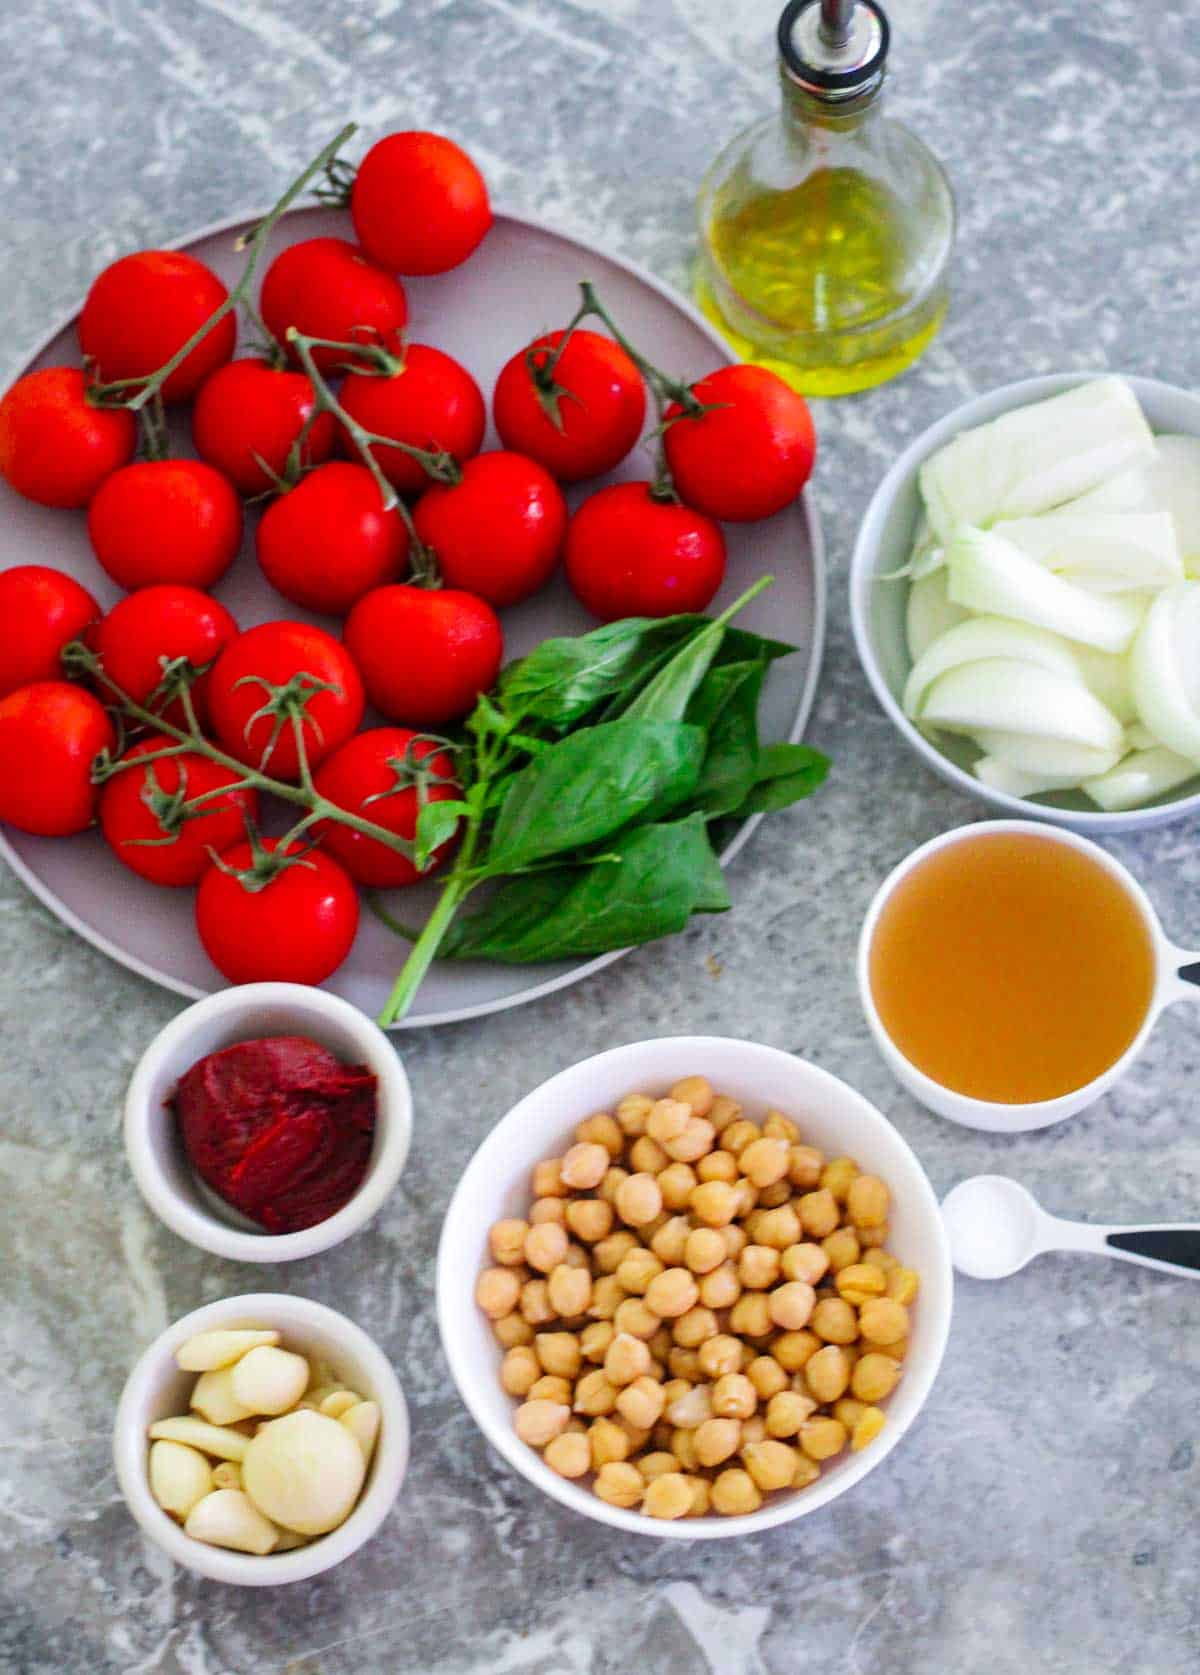 
Ingredients for roasted tomato soup: Campari tomatoes, onions, olive oil, garlic, chicken broth, tomato paste, chickpeas, salt (not all ingredients are pictured for example black pepper, thyme and heavy cream).